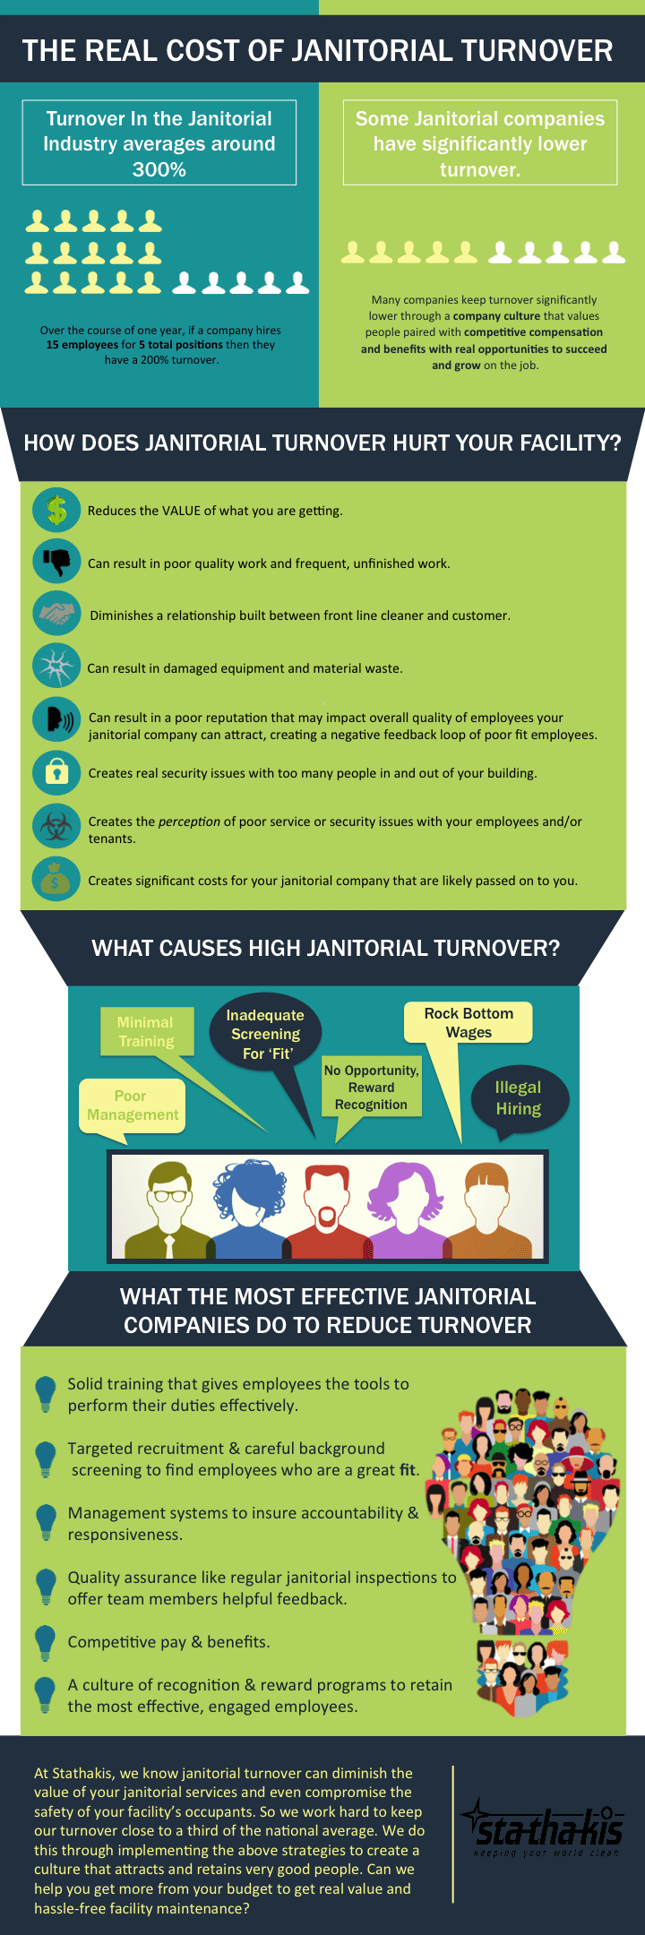 janitorial turnover infographic, detroit cleaning company, michigan janitorial, janitorial infographic 